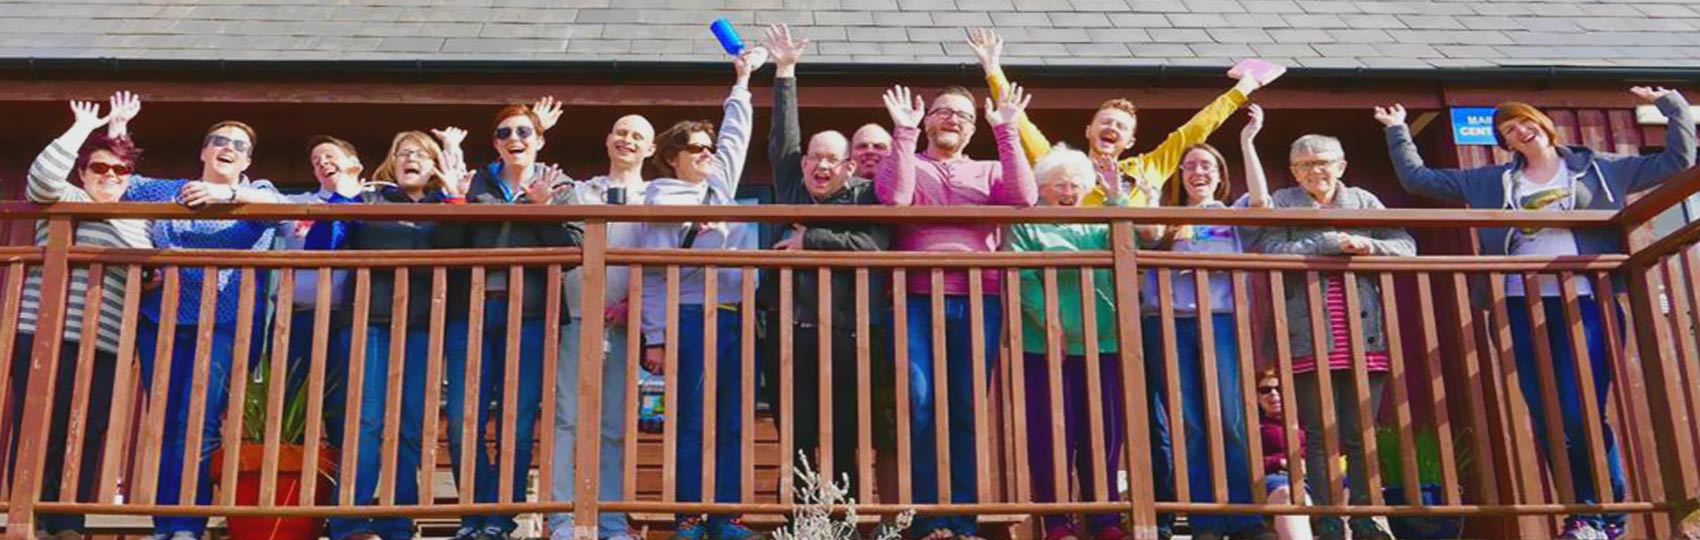 Large group of people taking a group photo on a balcony at Anglesey Outdoors